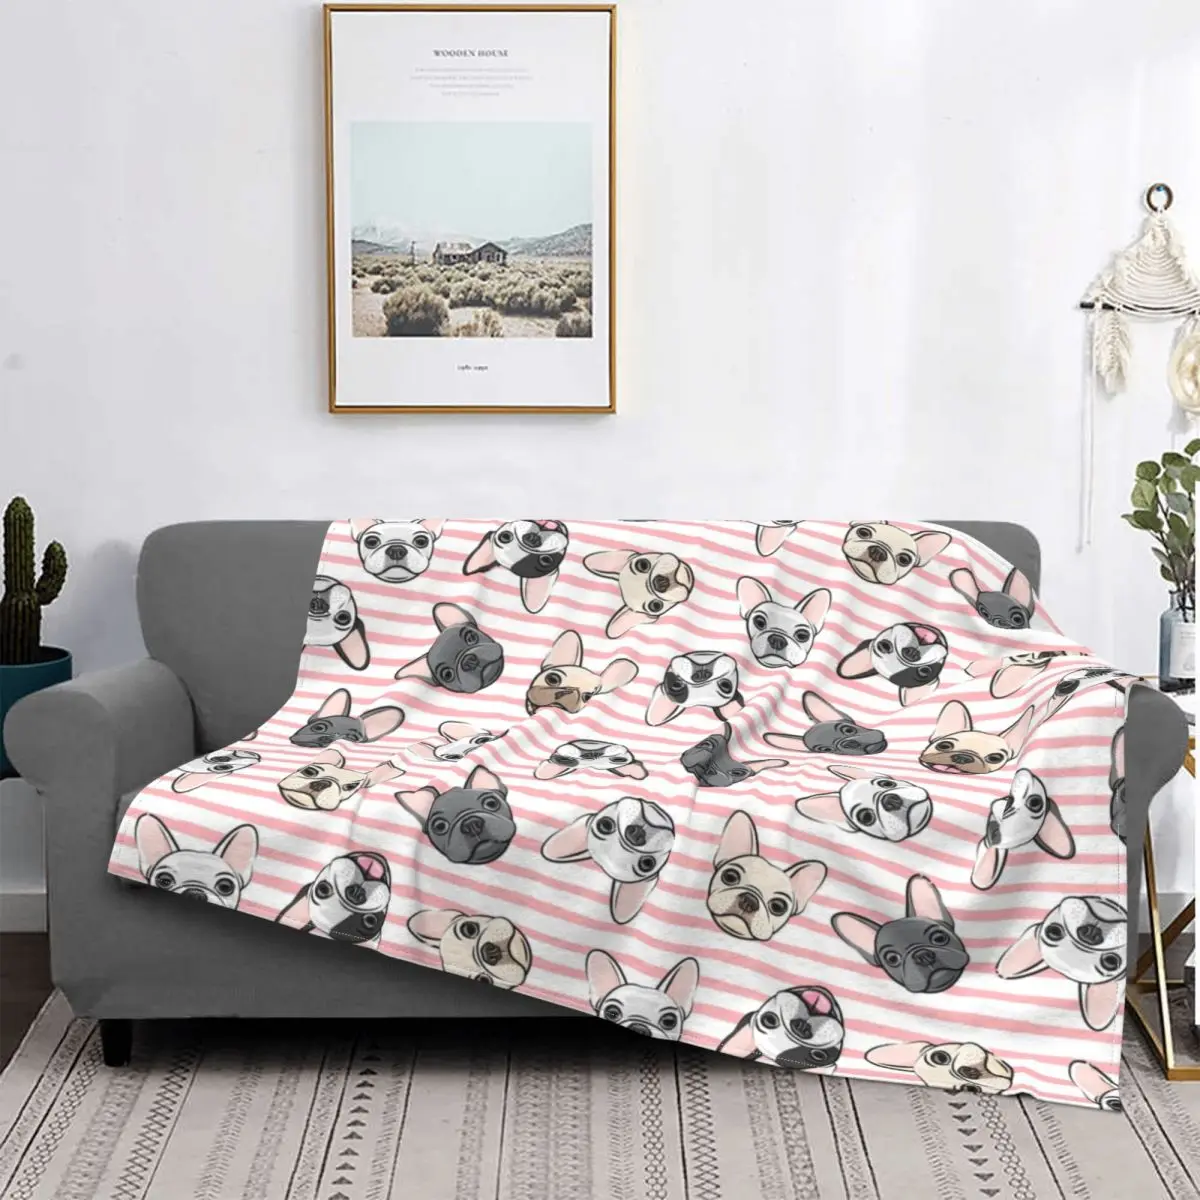 

All The Frenchies Pink Stripes French Bulldog Dog Blanket Coral Fleece All Season Soft Throw Blanket for Bedding Car Bedspread